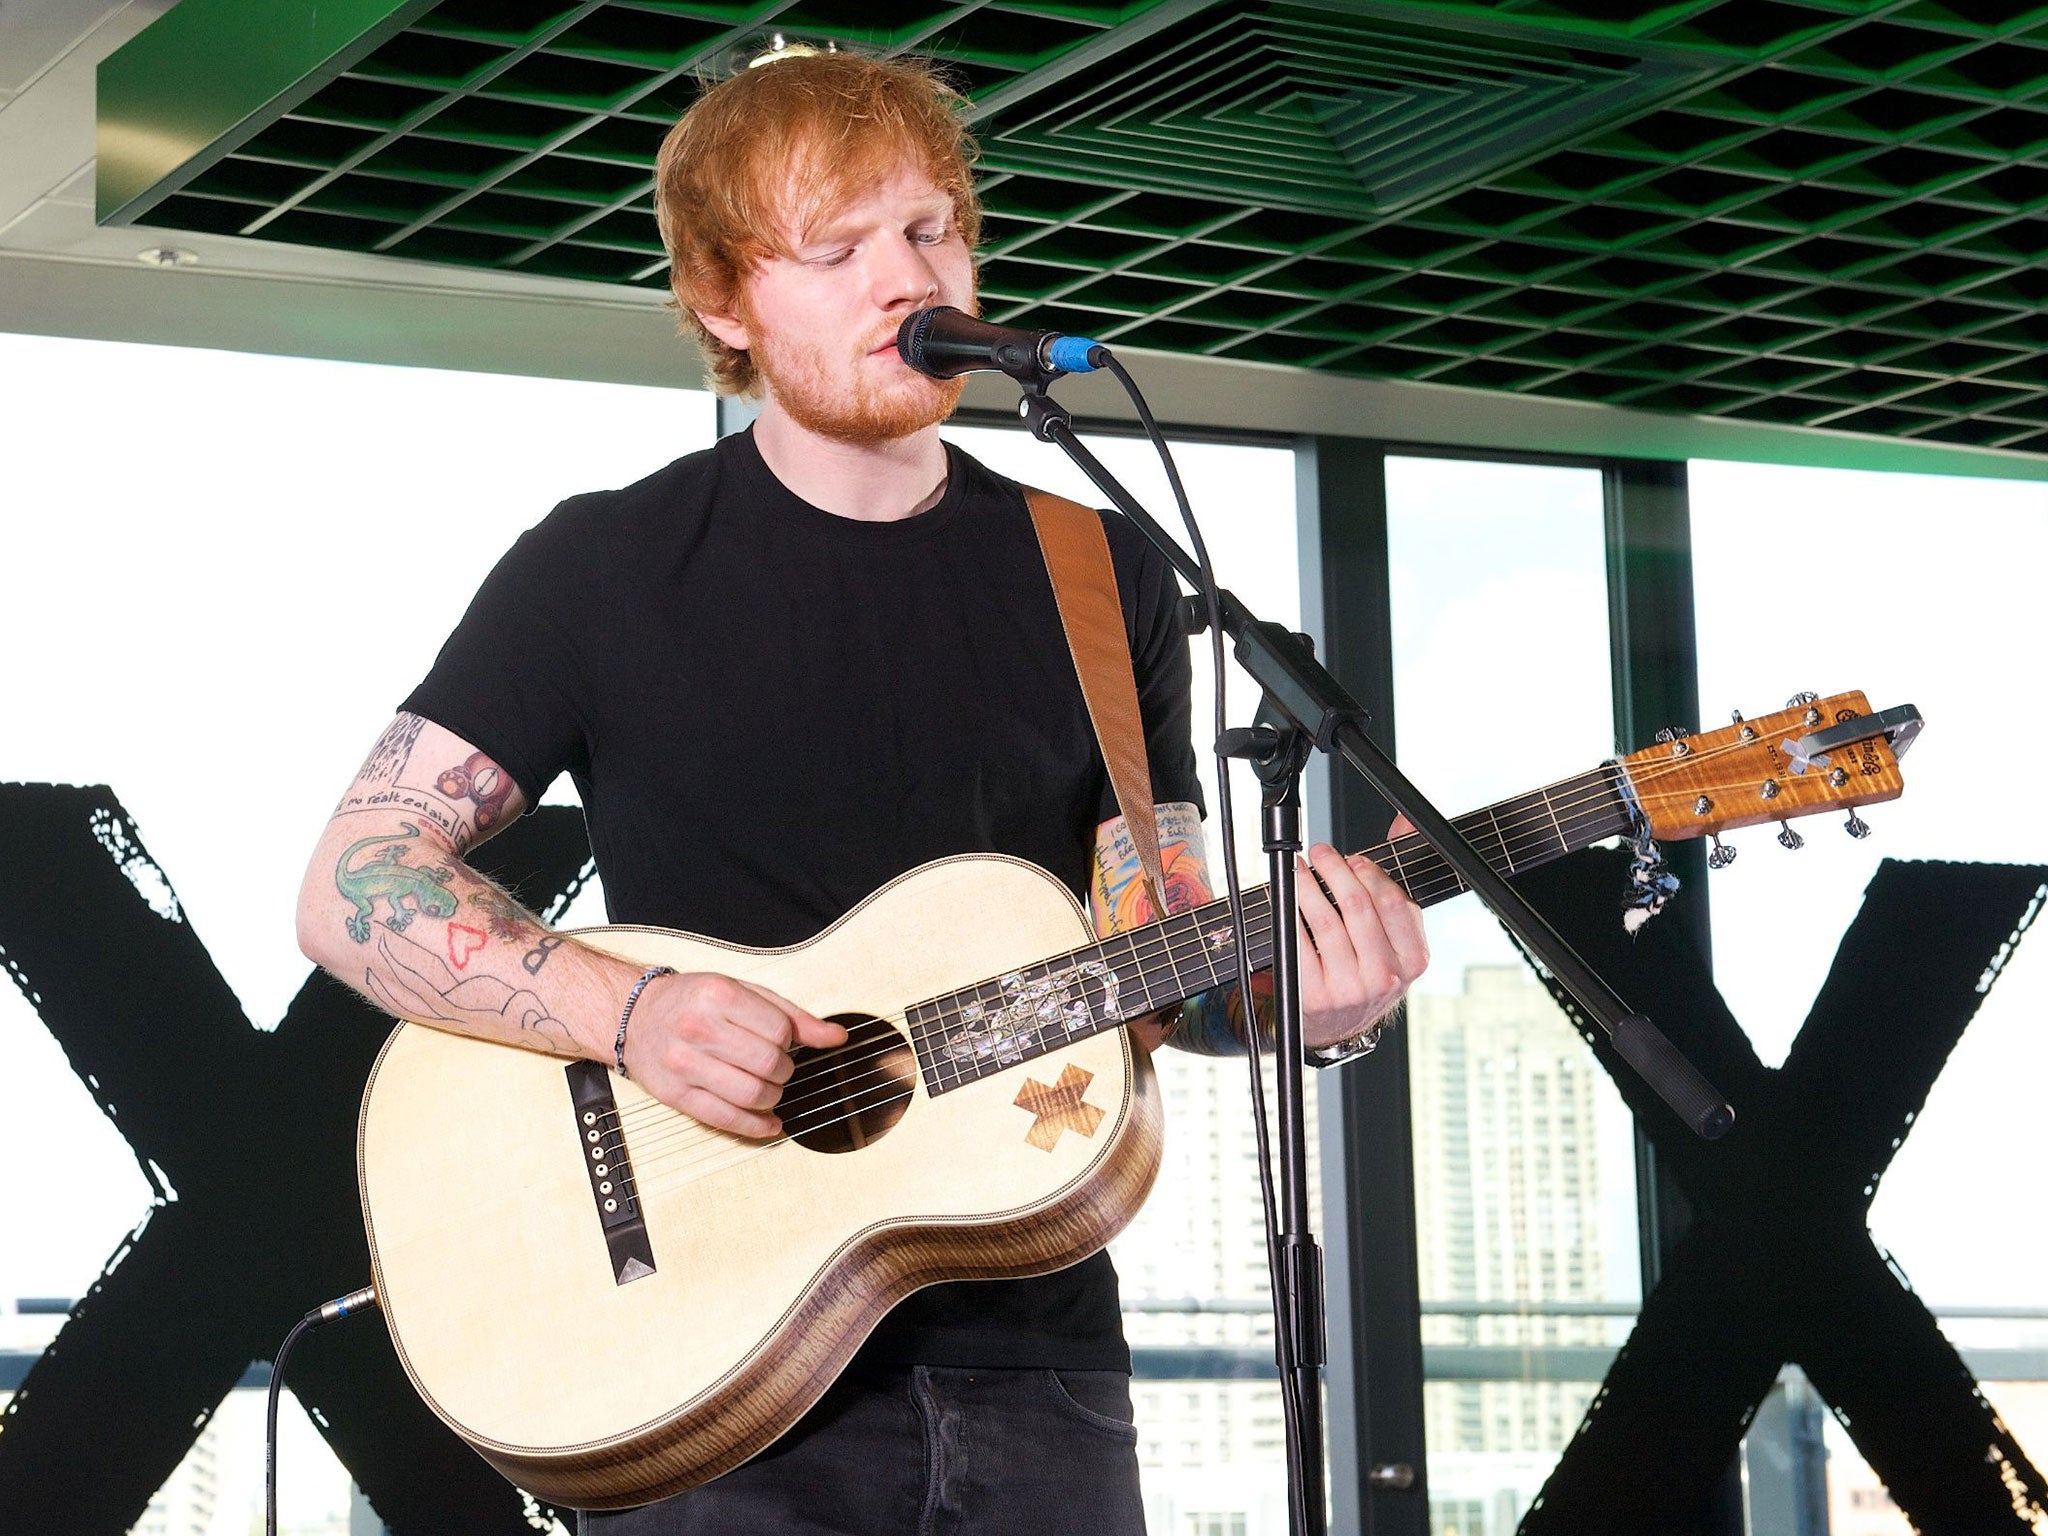 Ed Sheeran performs at his Amazon Front Row event on Tuesday 30 September